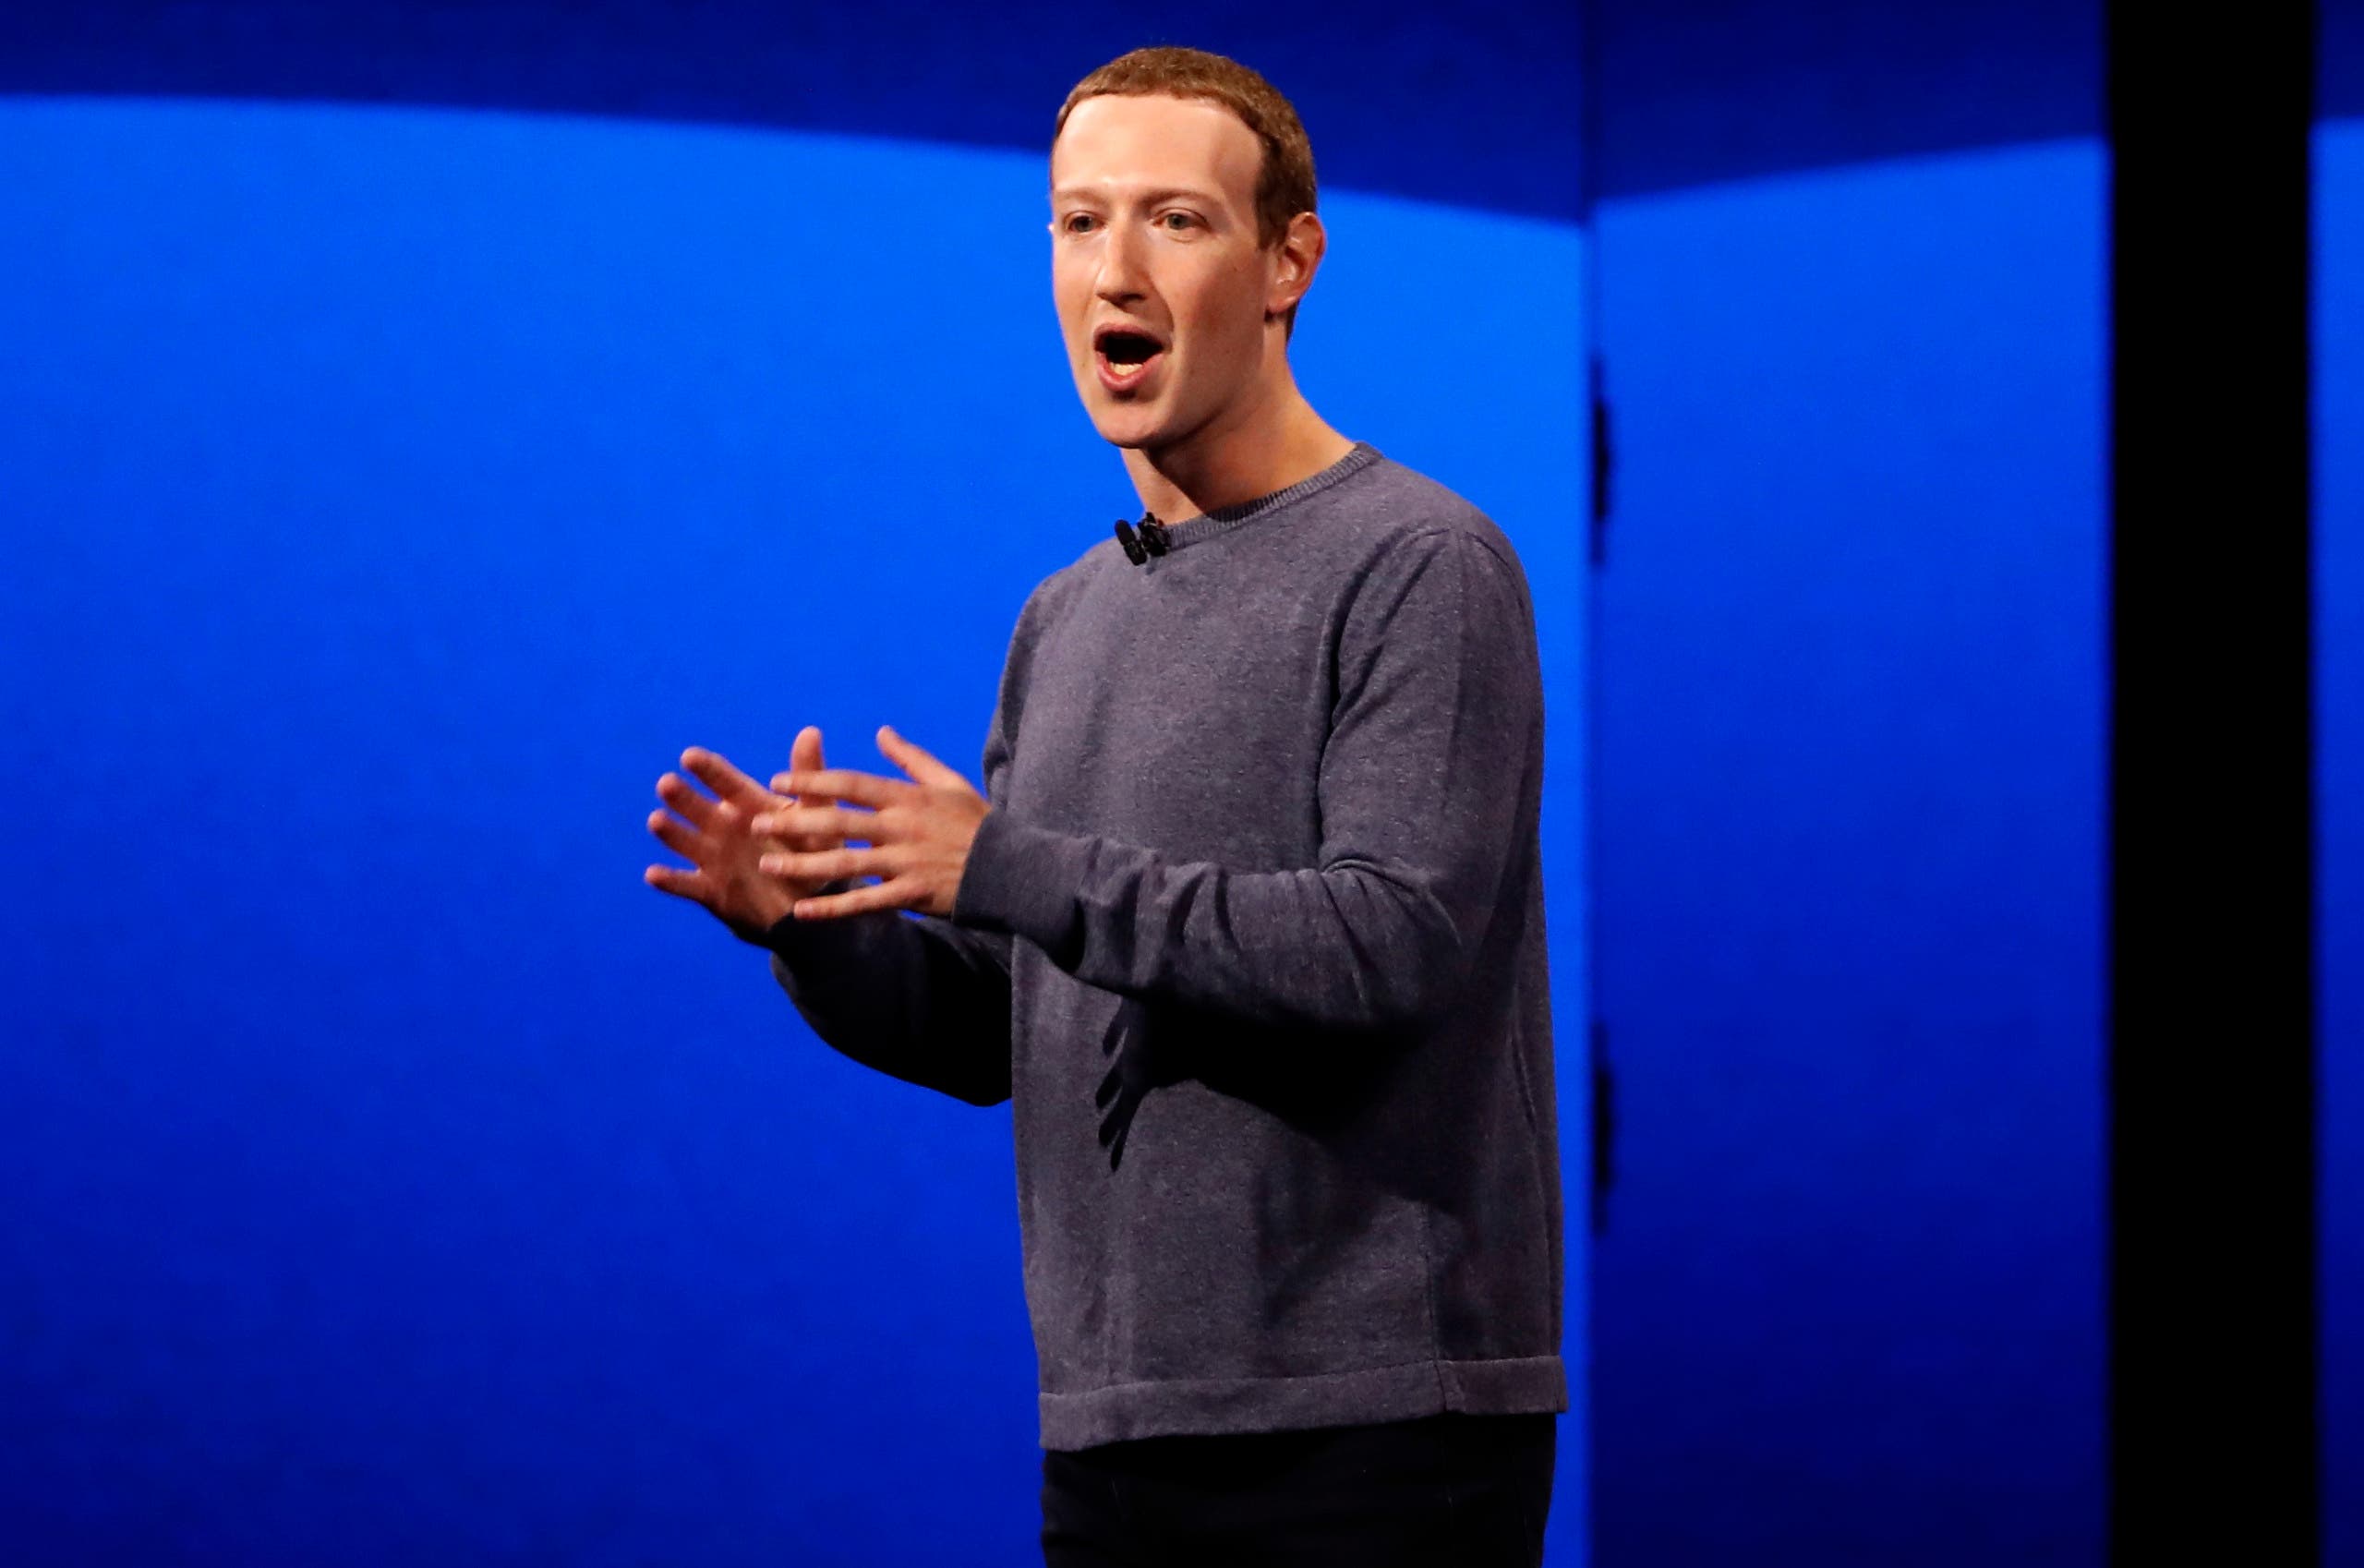 Facebook CEO Mark Zuckerberg makes his keynote speech during Facebook Inc's annual F8 developers conference in San Jose, California, U.S., April 30, 2019. (File photo: Reuters)